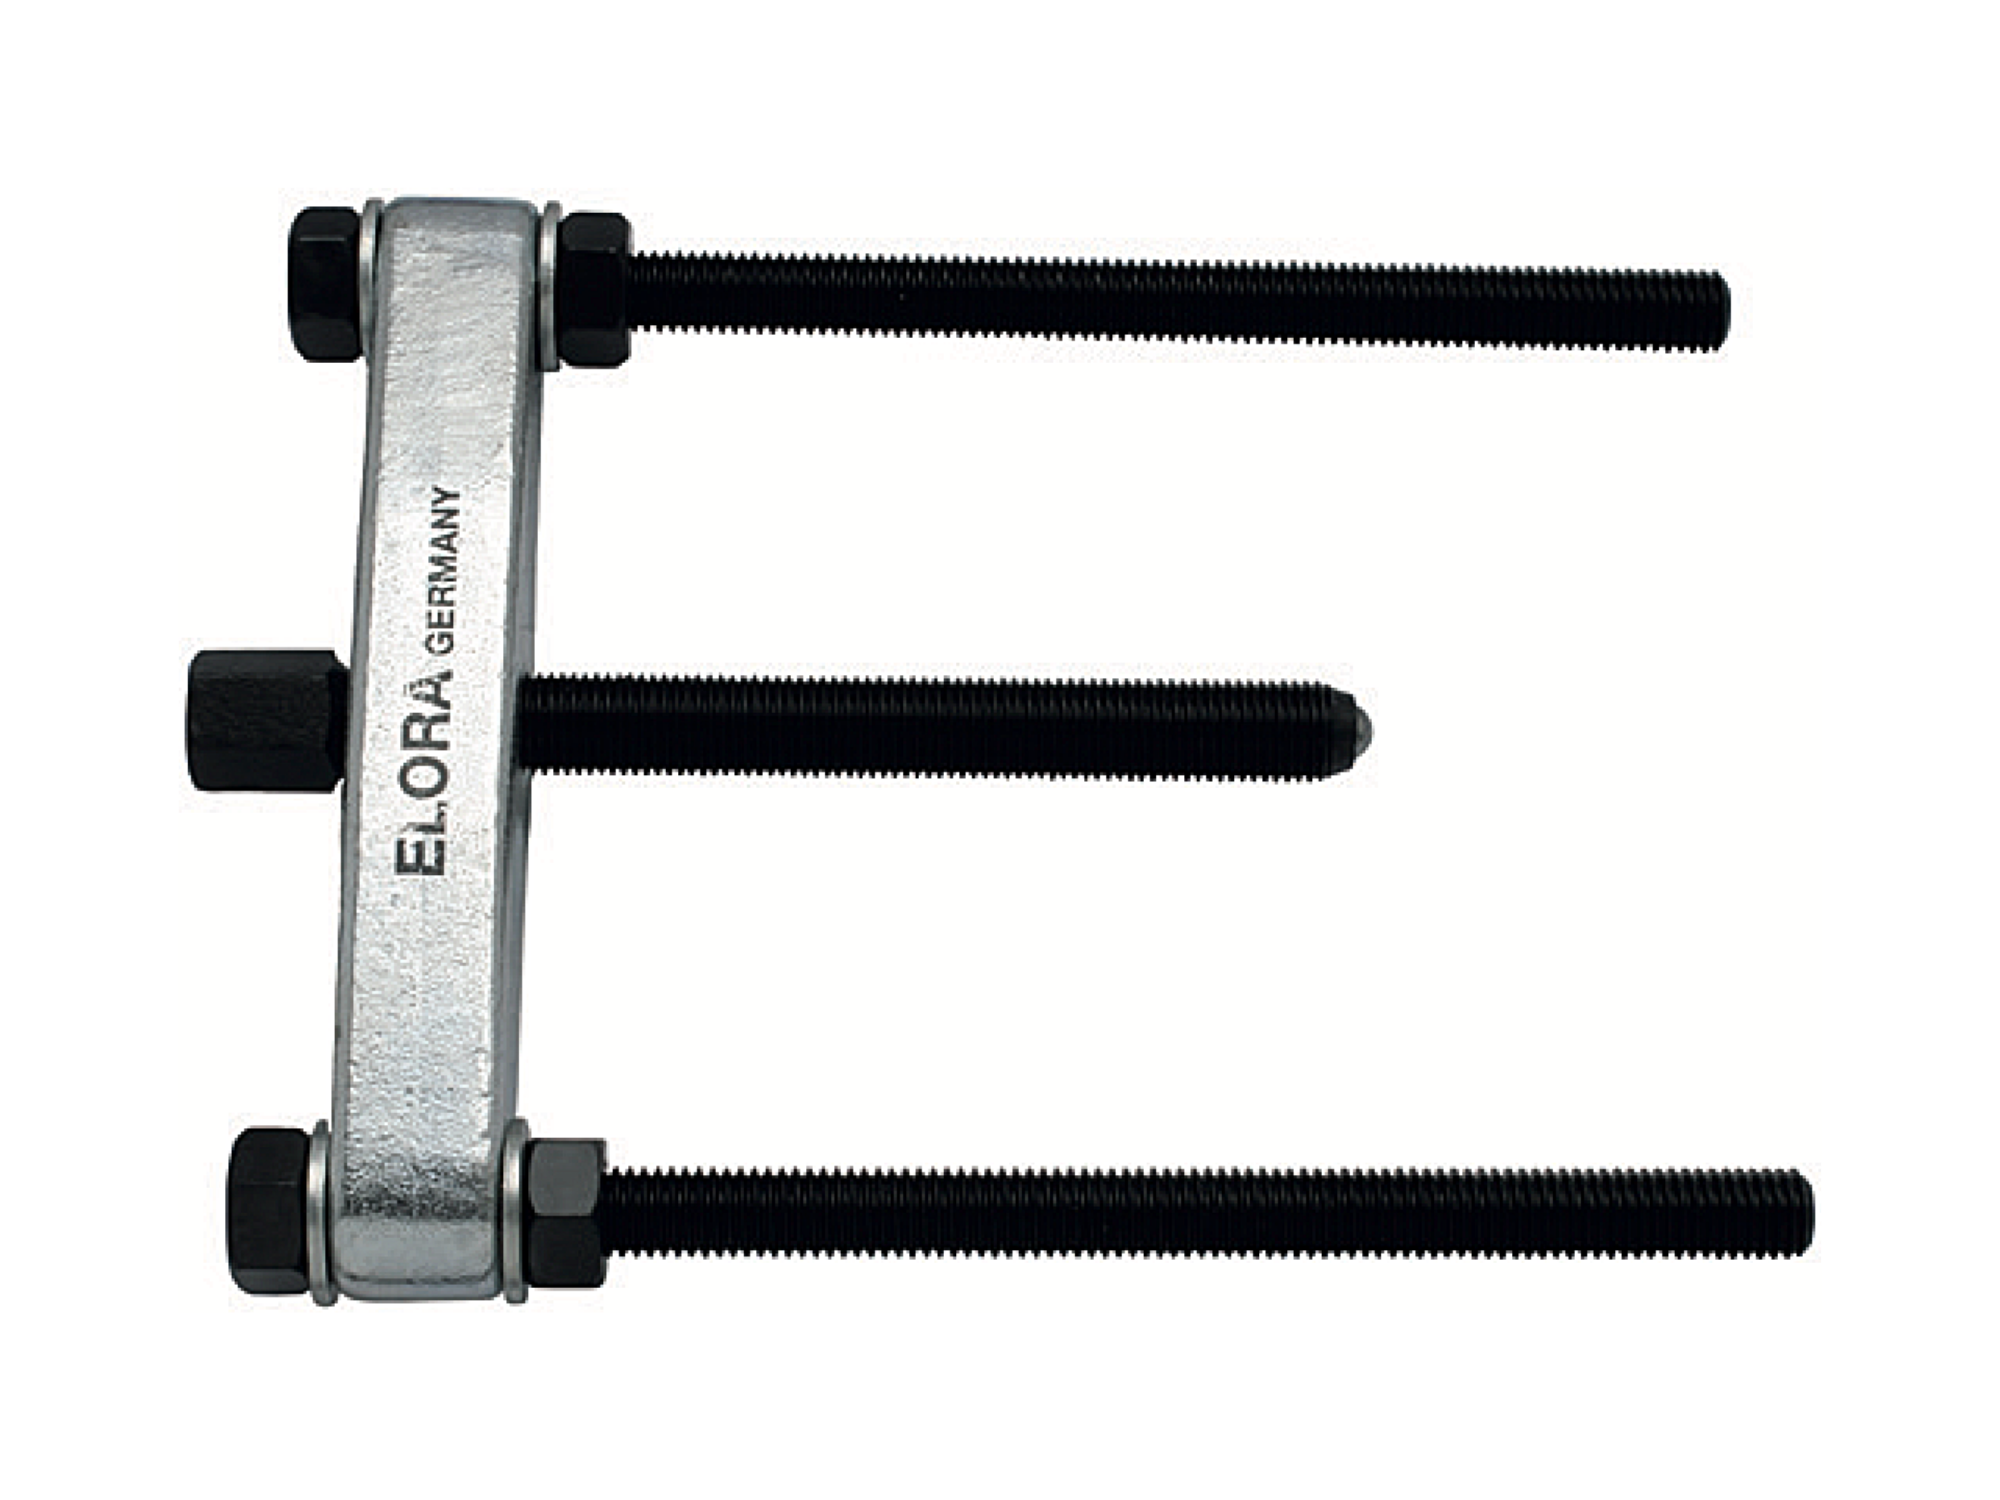 Copy of ELORA 325-326 Separator With Tapered Blades (ELORA Tools) - Premium Pullers from ELORA - Shop now at Yew Aik.